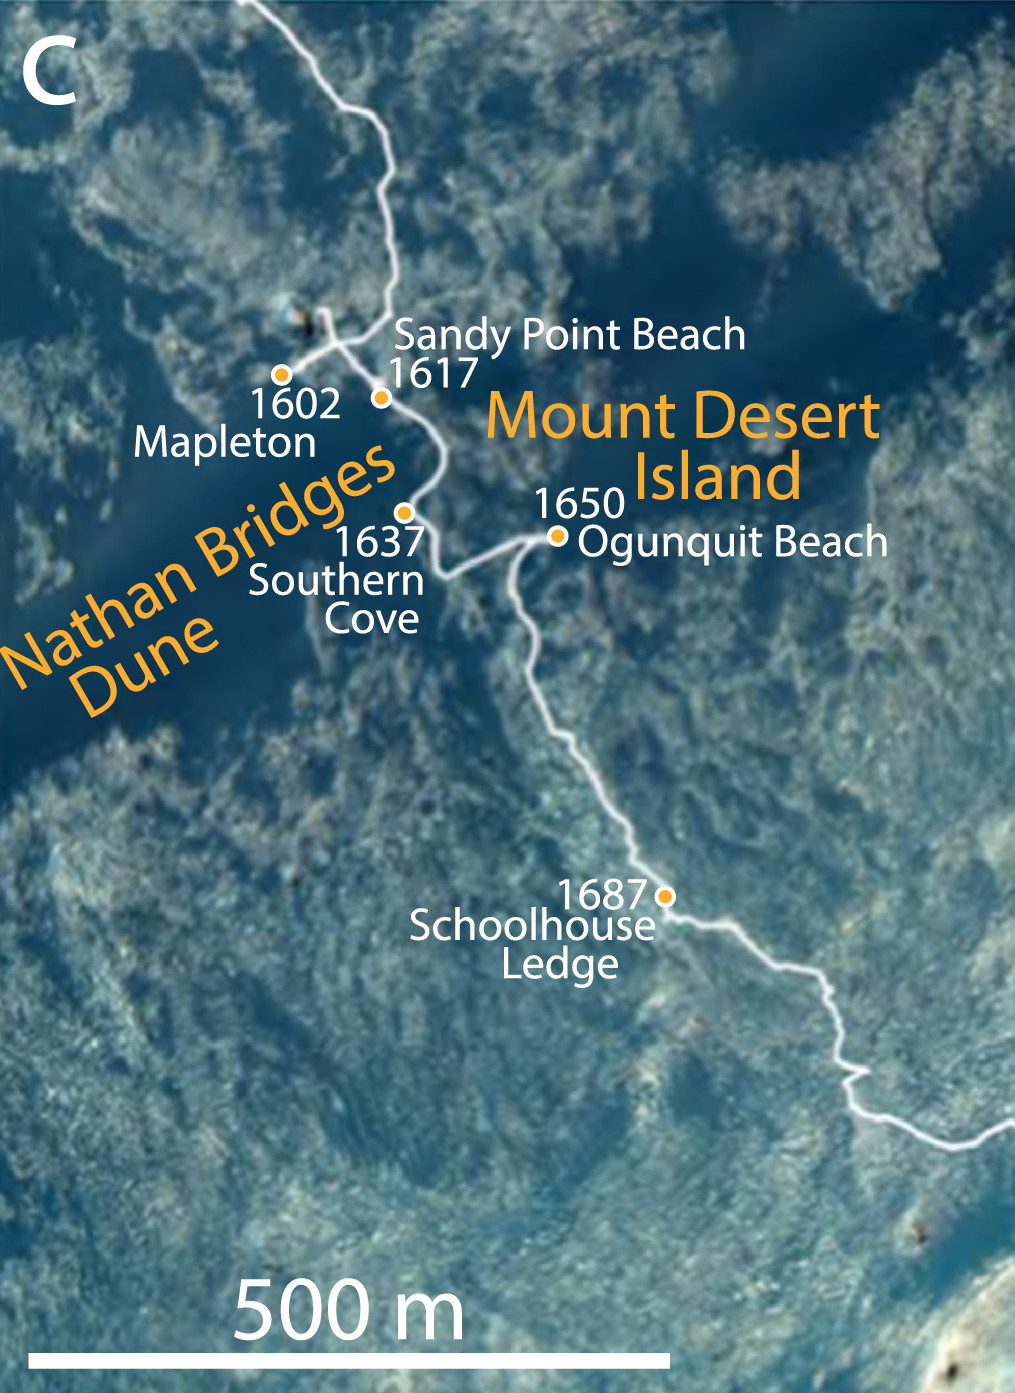 Satellite image with the rover path and dune names marked.